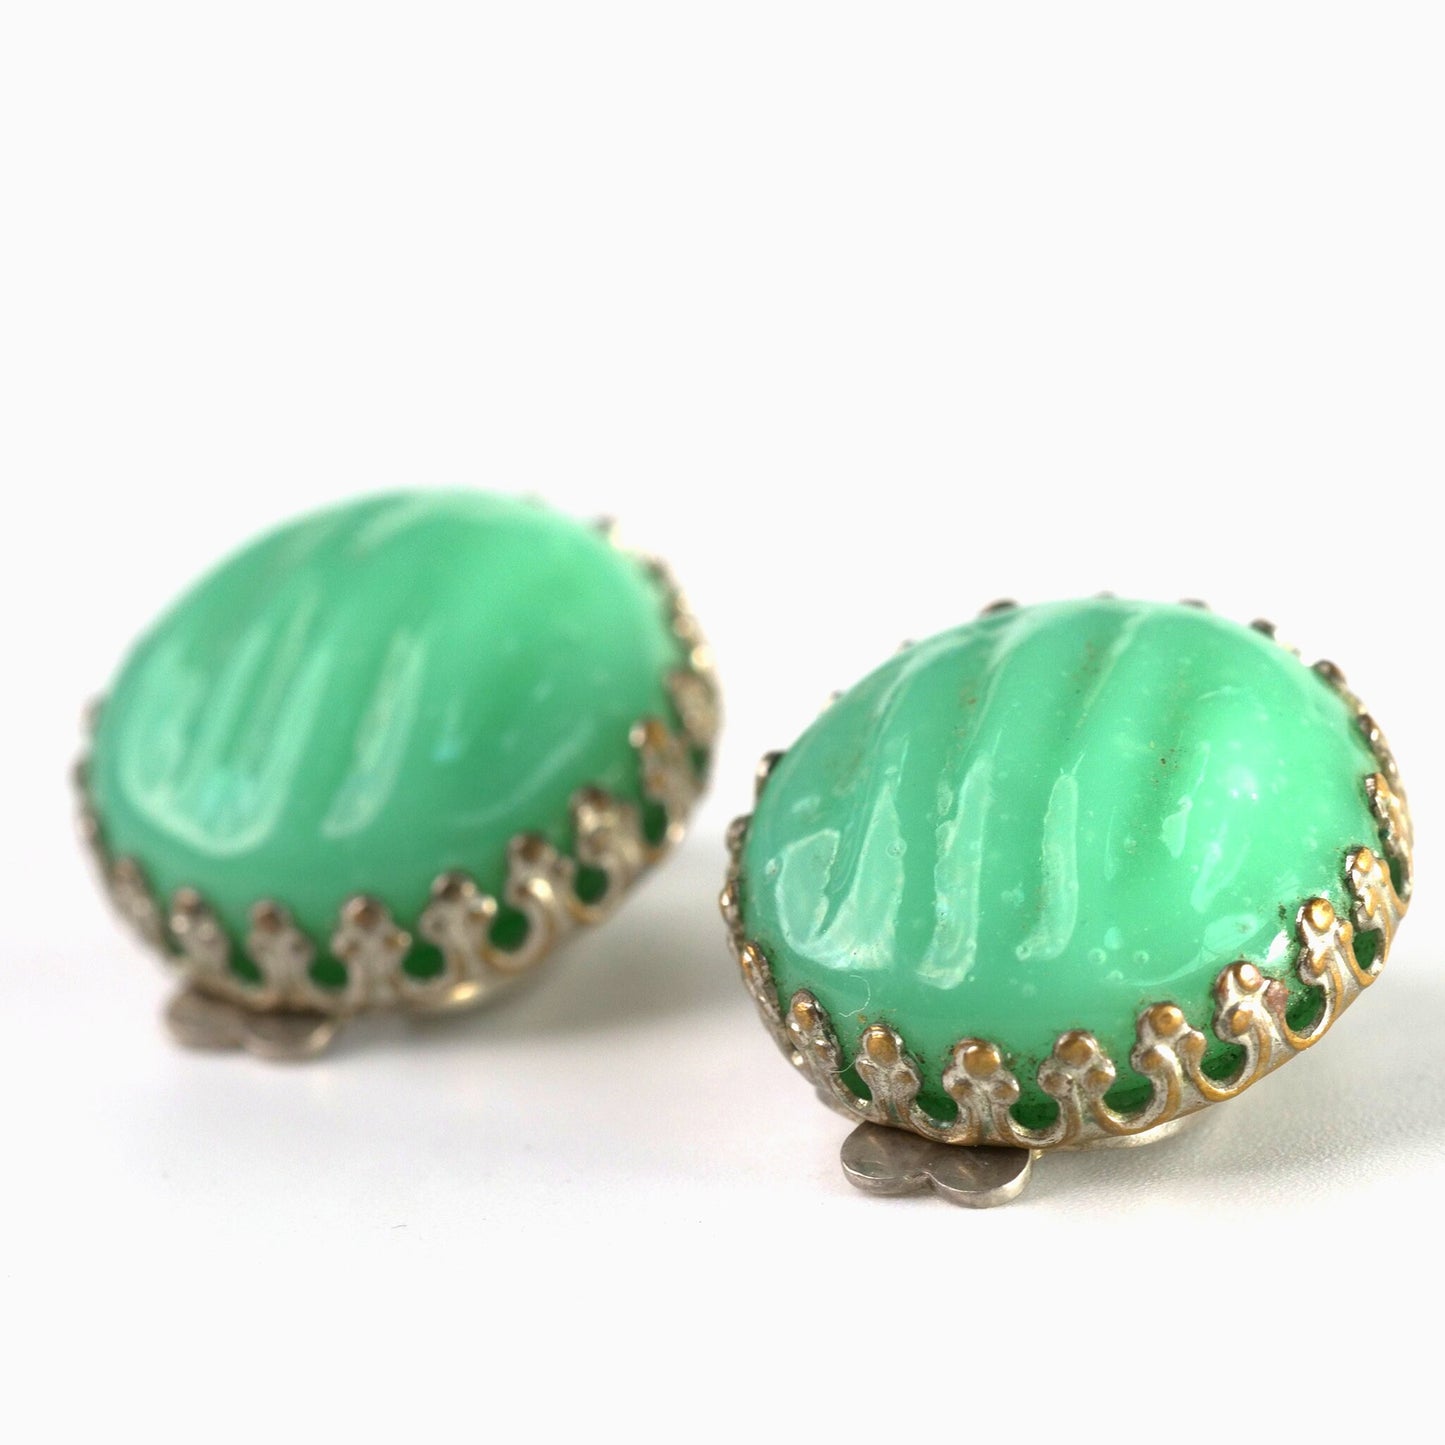 A Pair of Vintage Green Molded Glass Clip On Earrings with Dog Tooth Prong Setting